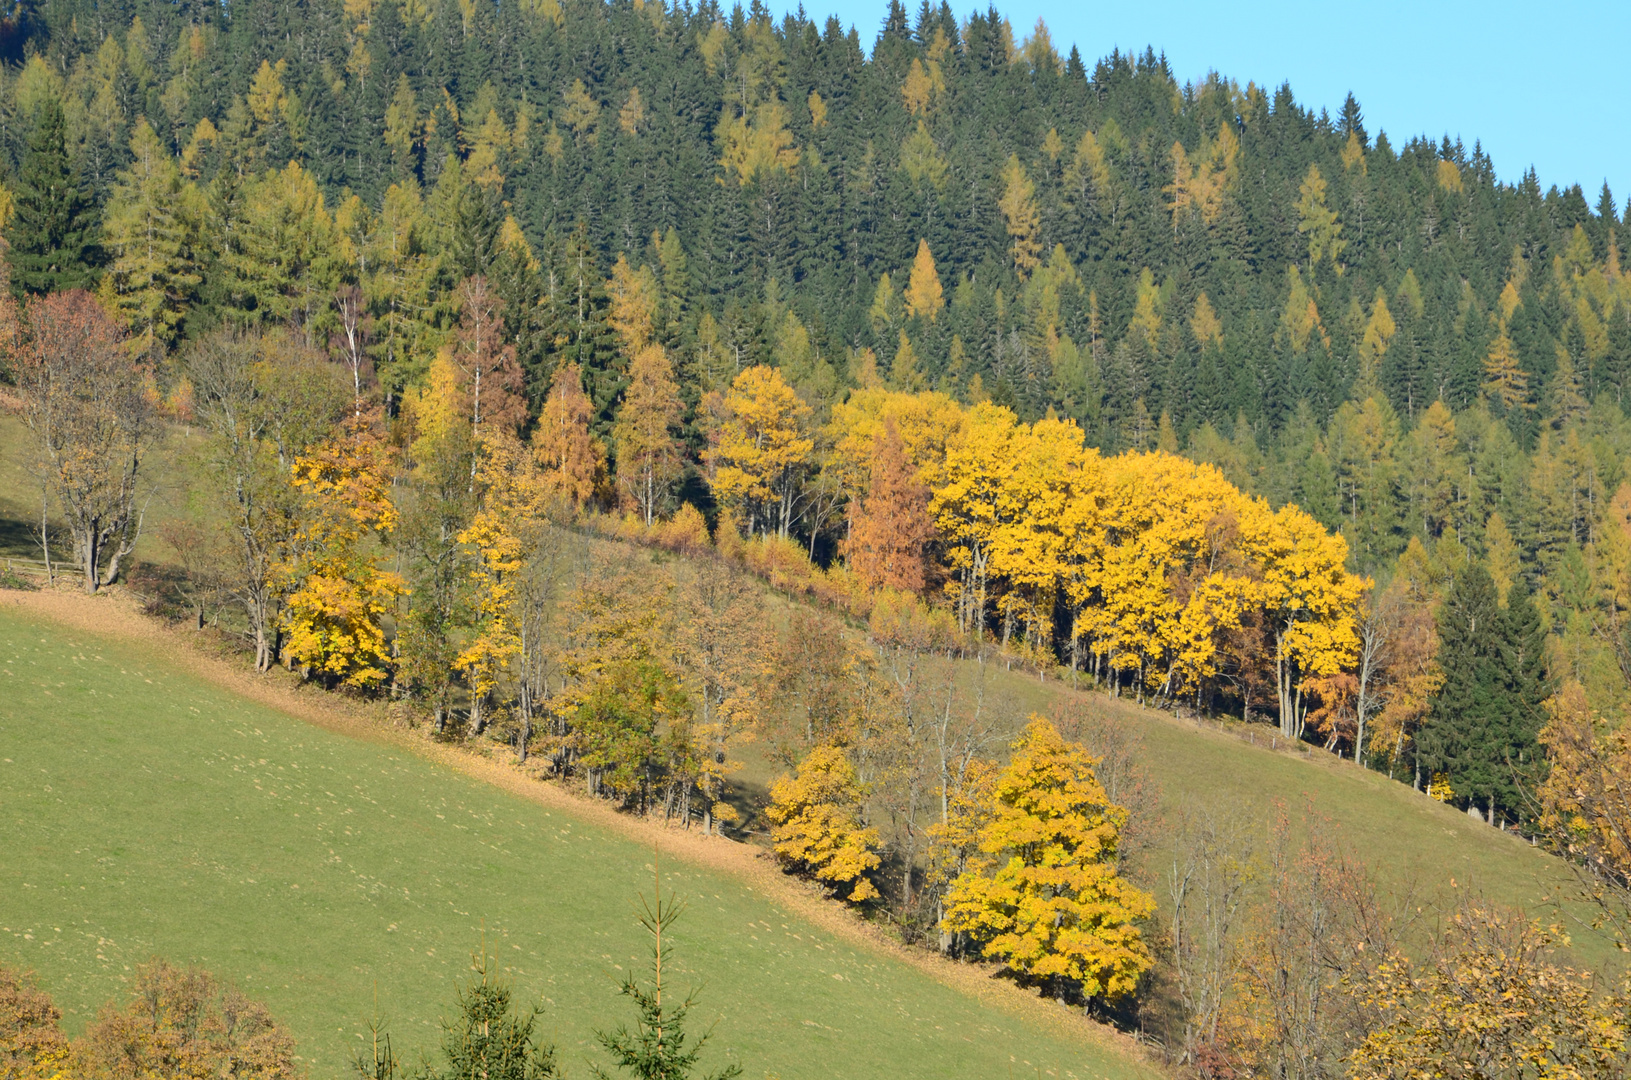 Herbst Gold!